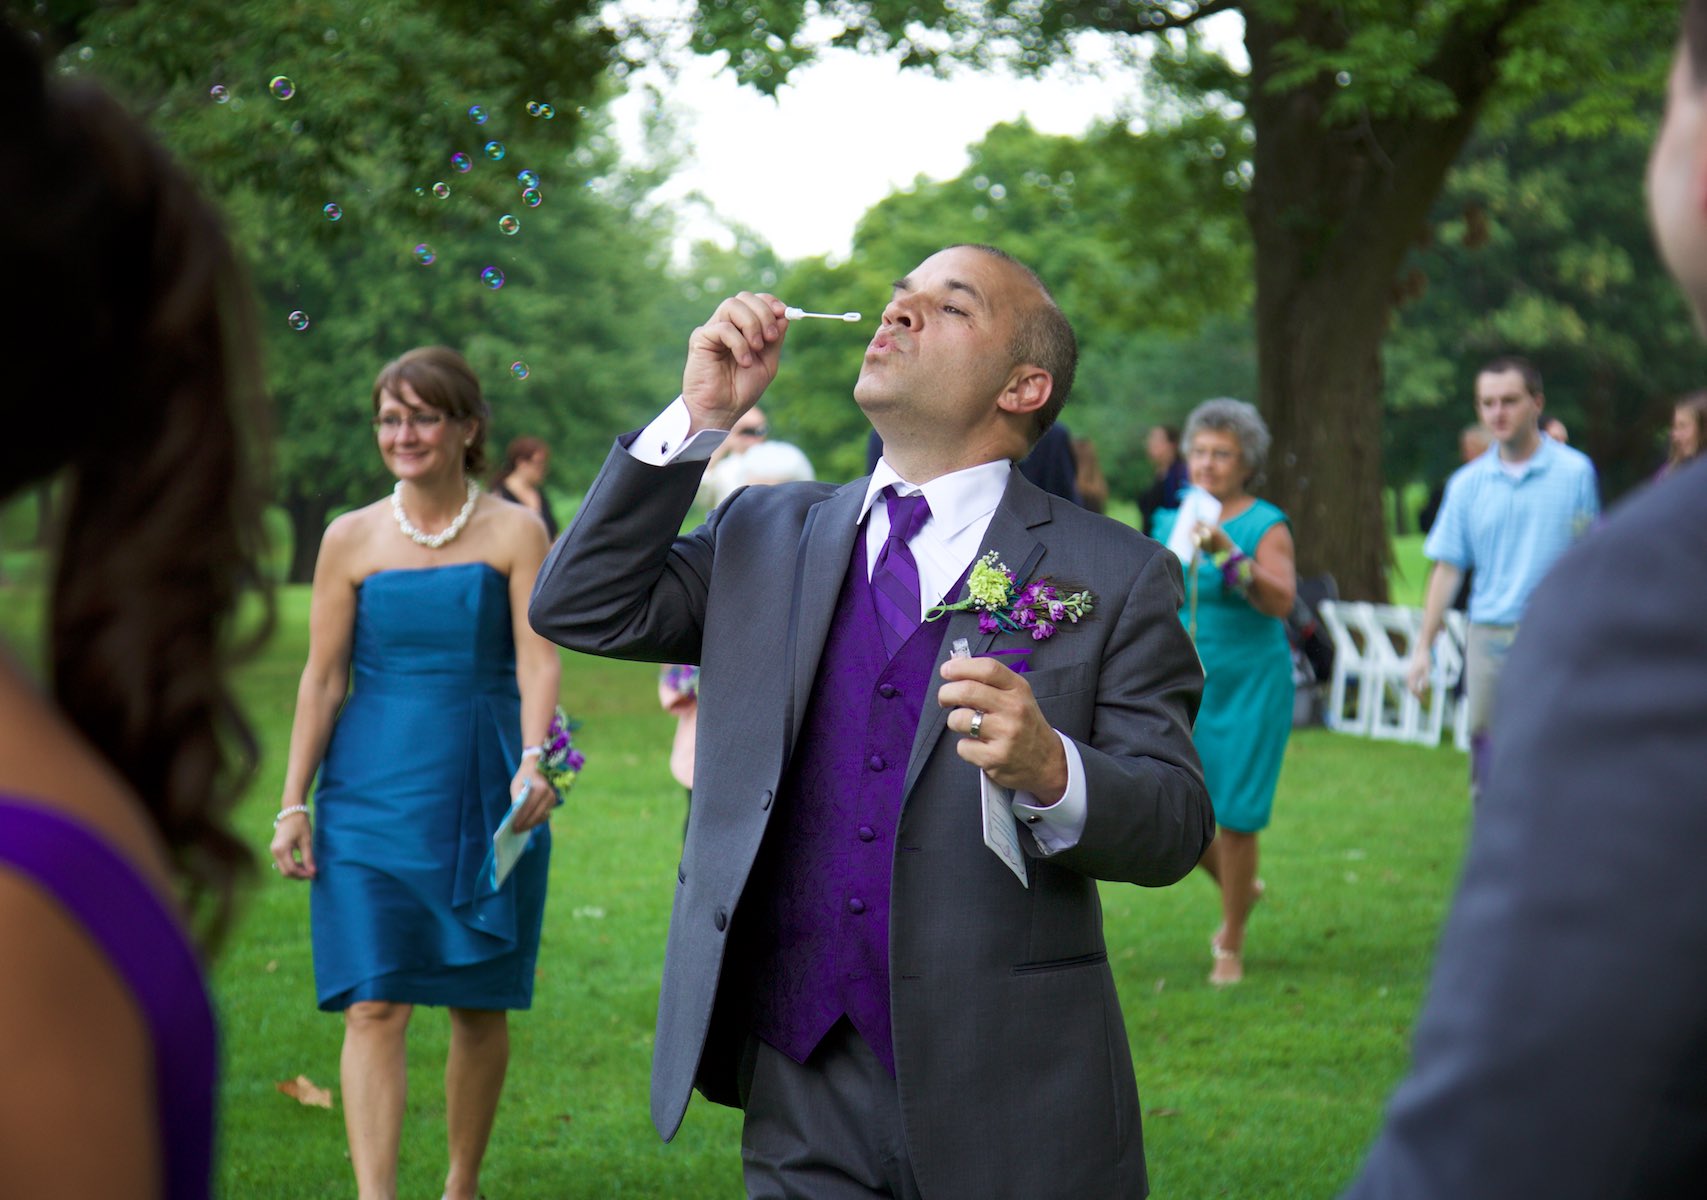 Nick's father blows bubbles after the outdoor wedding ceremony at the Jacksonville Illinois Country Club. Wedding photography by Steve & Tiffany Warmowski.